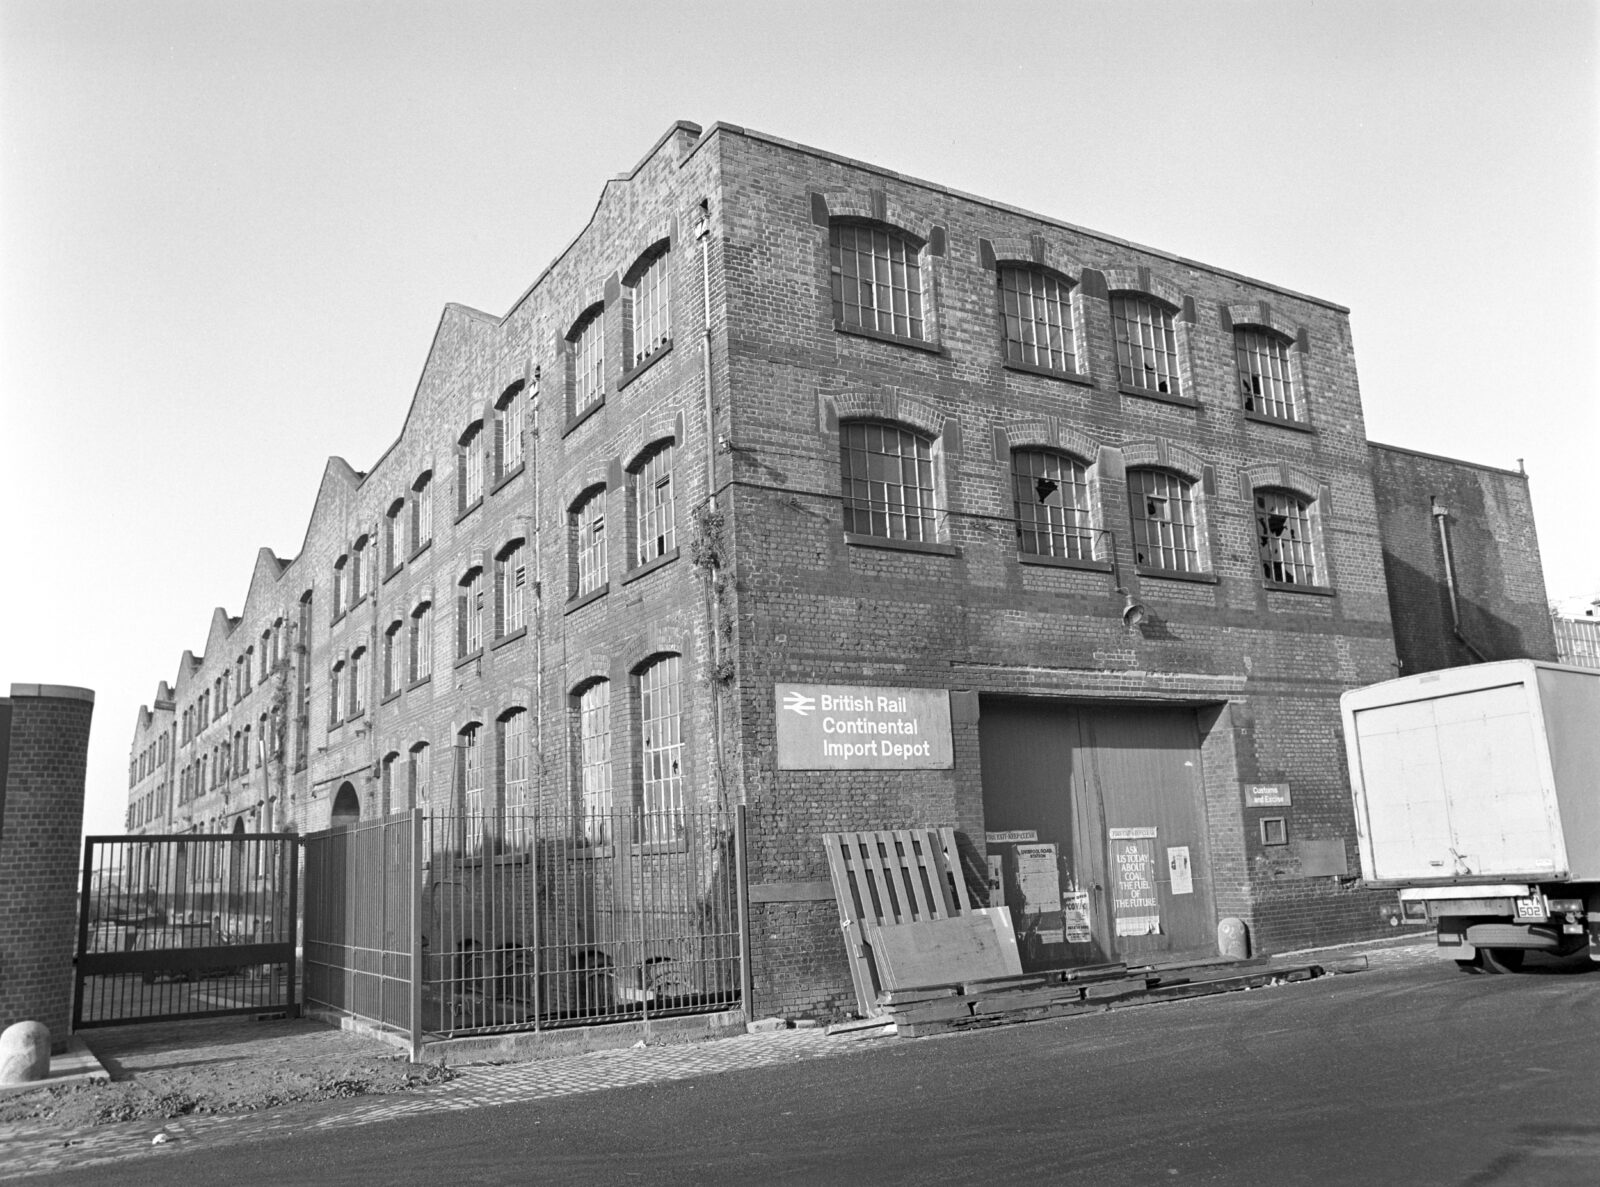 Lower Byrom street warehouse, Liverpool road station, Manchester 1983